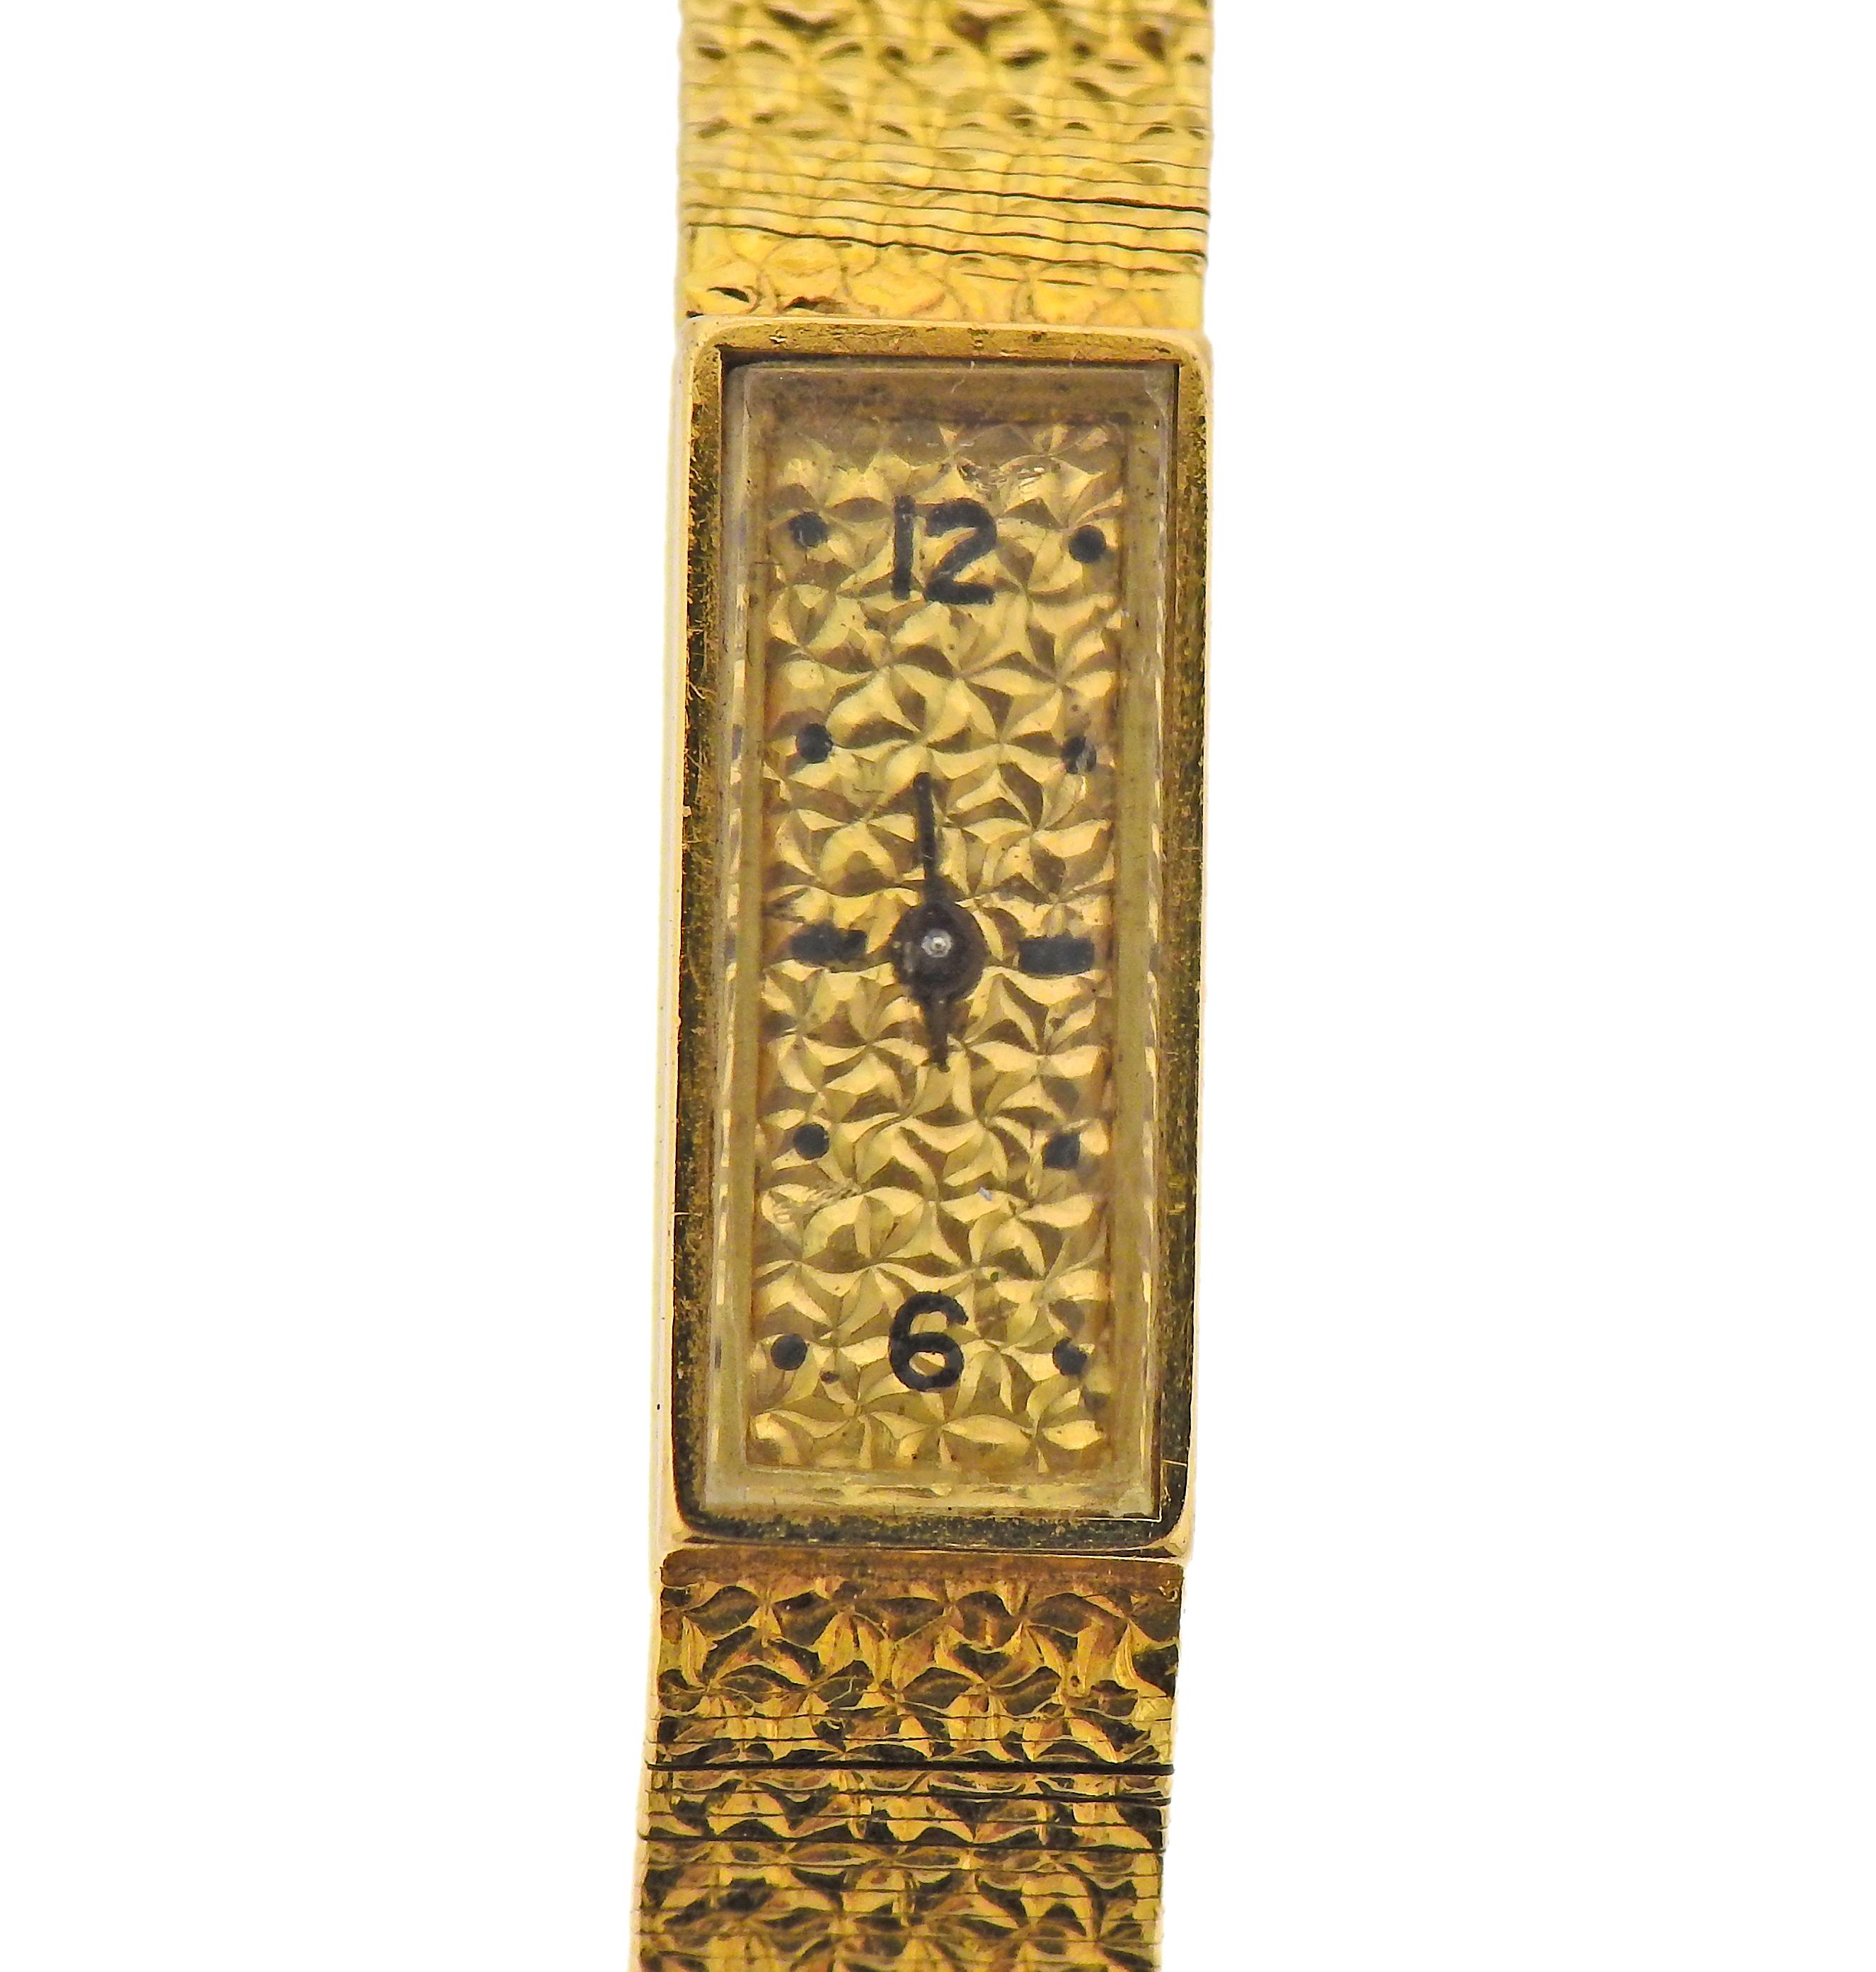 Vintage , circa Mid Century 18k gold lady's watch by Van Cleef & Arpels, with backwind manual movement. Bracelet is 6.5